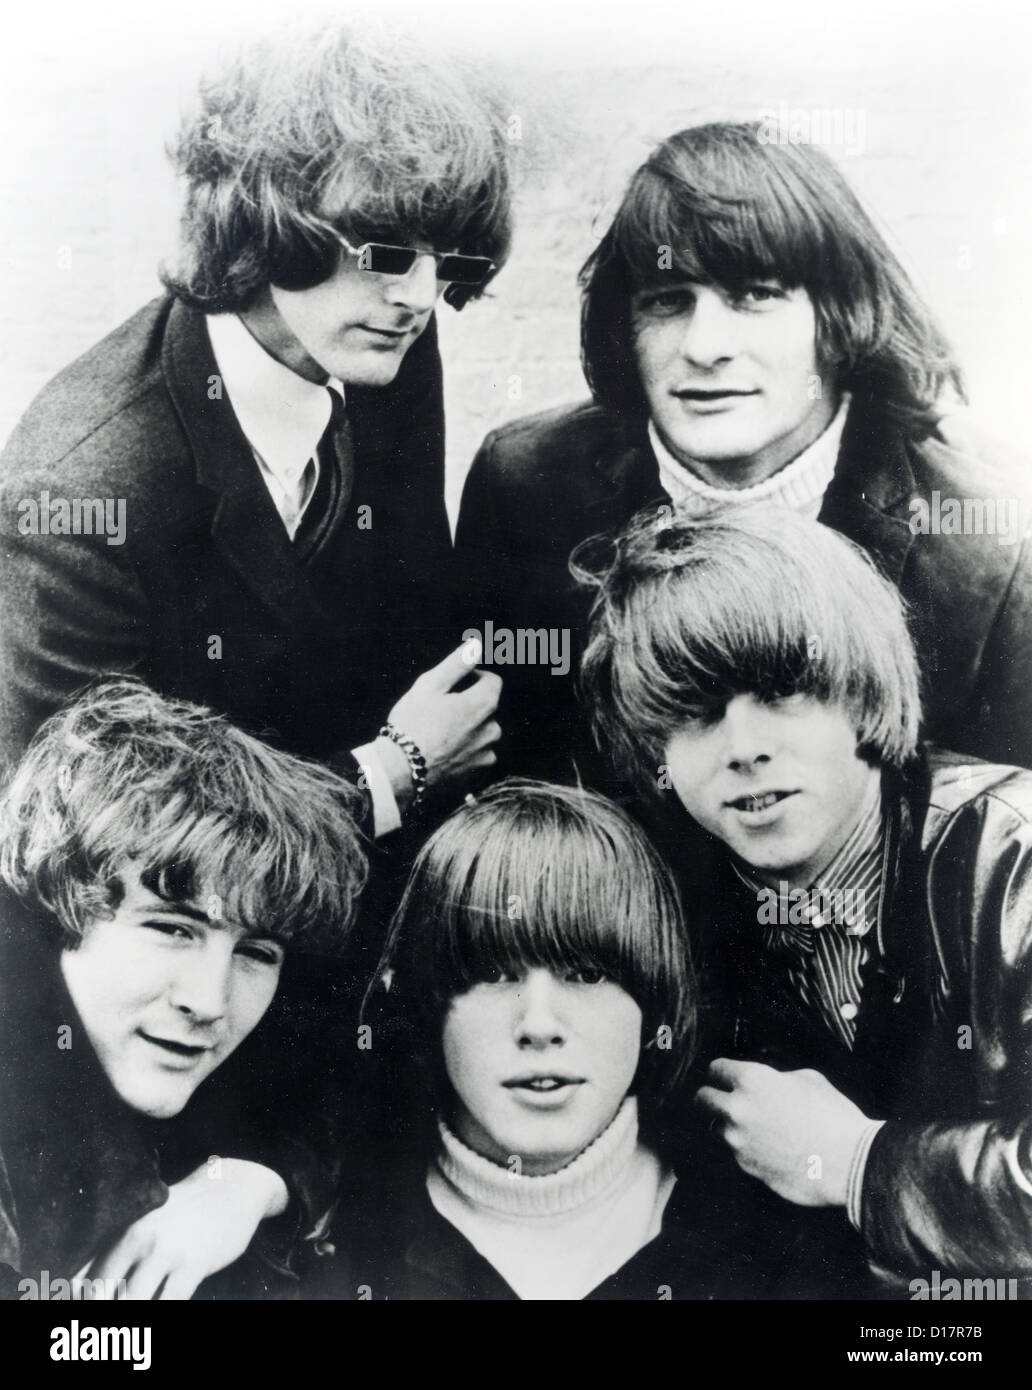 THE BYRDS Promotional photo of US pop group about 1965 - see Description below for names Stock Photo